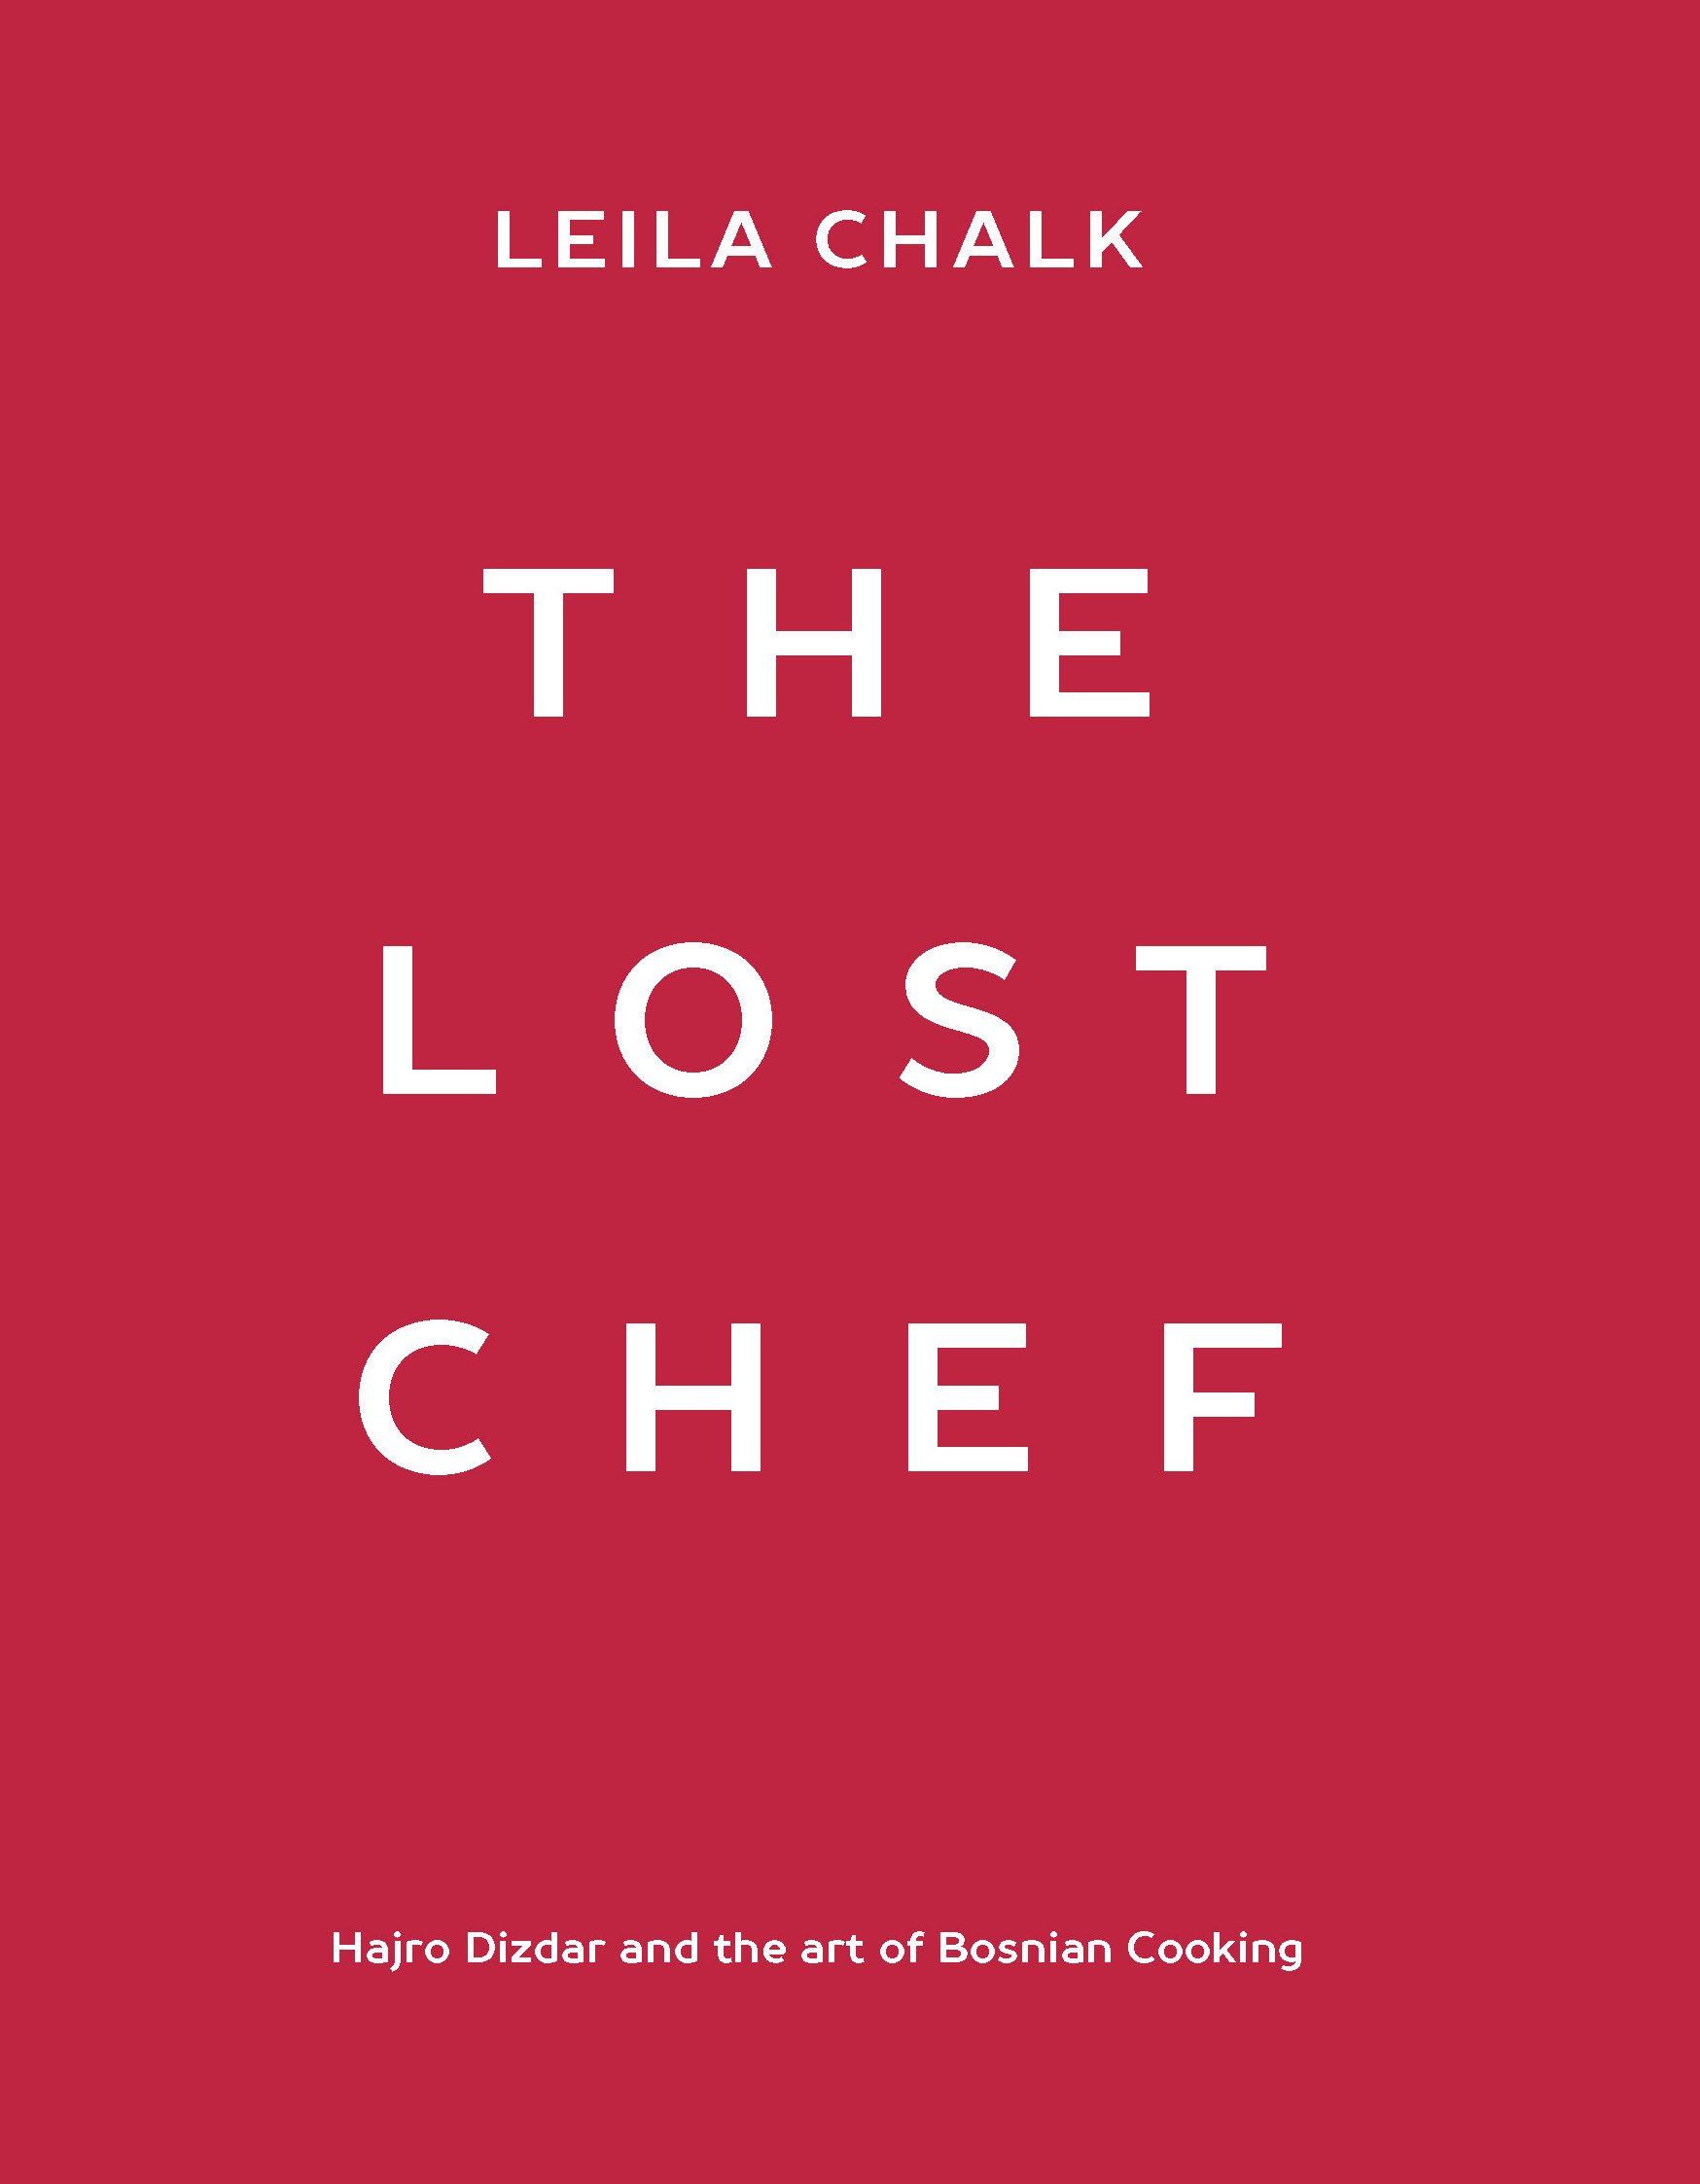 The Lost Chef - Hajro Dizdar and the art of Bosnian Cooking